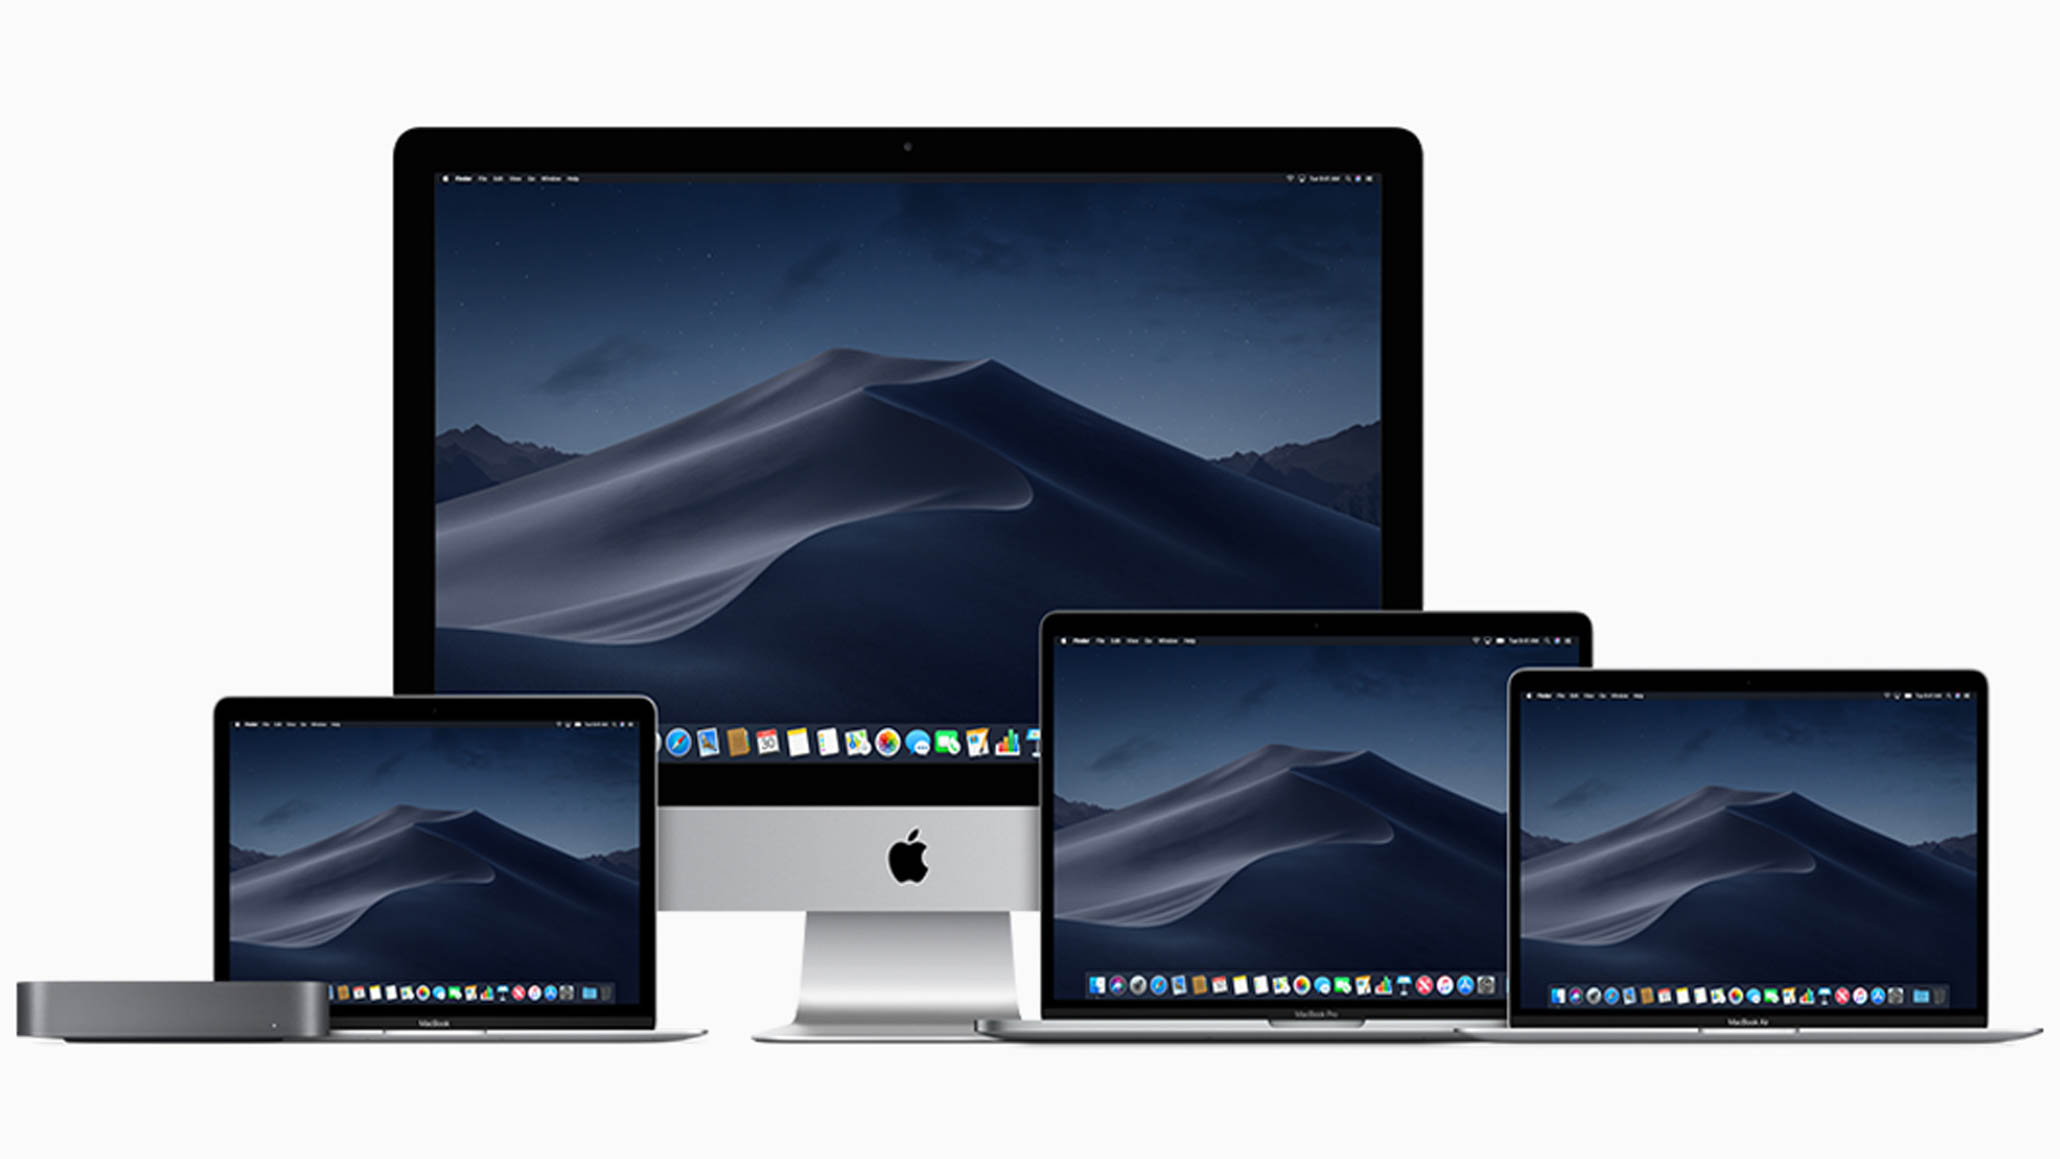 From left to right: Apple Mac Mini, MacBook Air, iMac, MacBook Pro, and MacBook. Image: Apple.